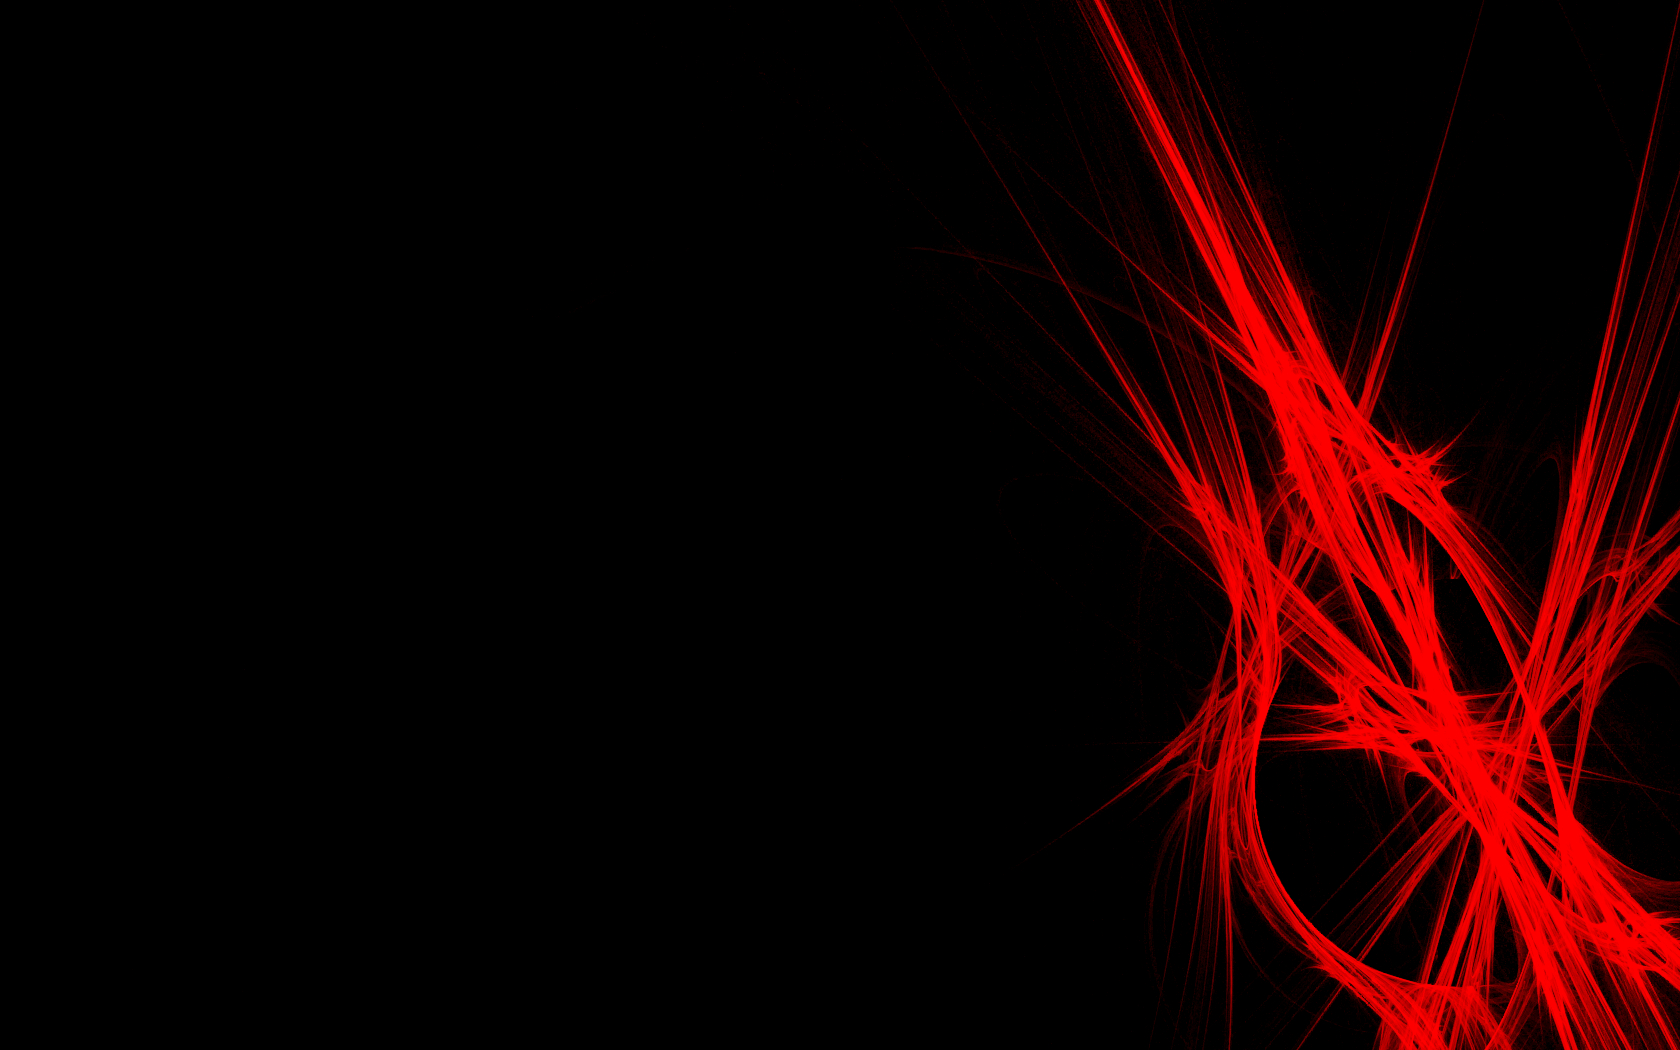 Black And Red Abstract Backgrounds For Powerpoint Templates Ppt Backgrounds